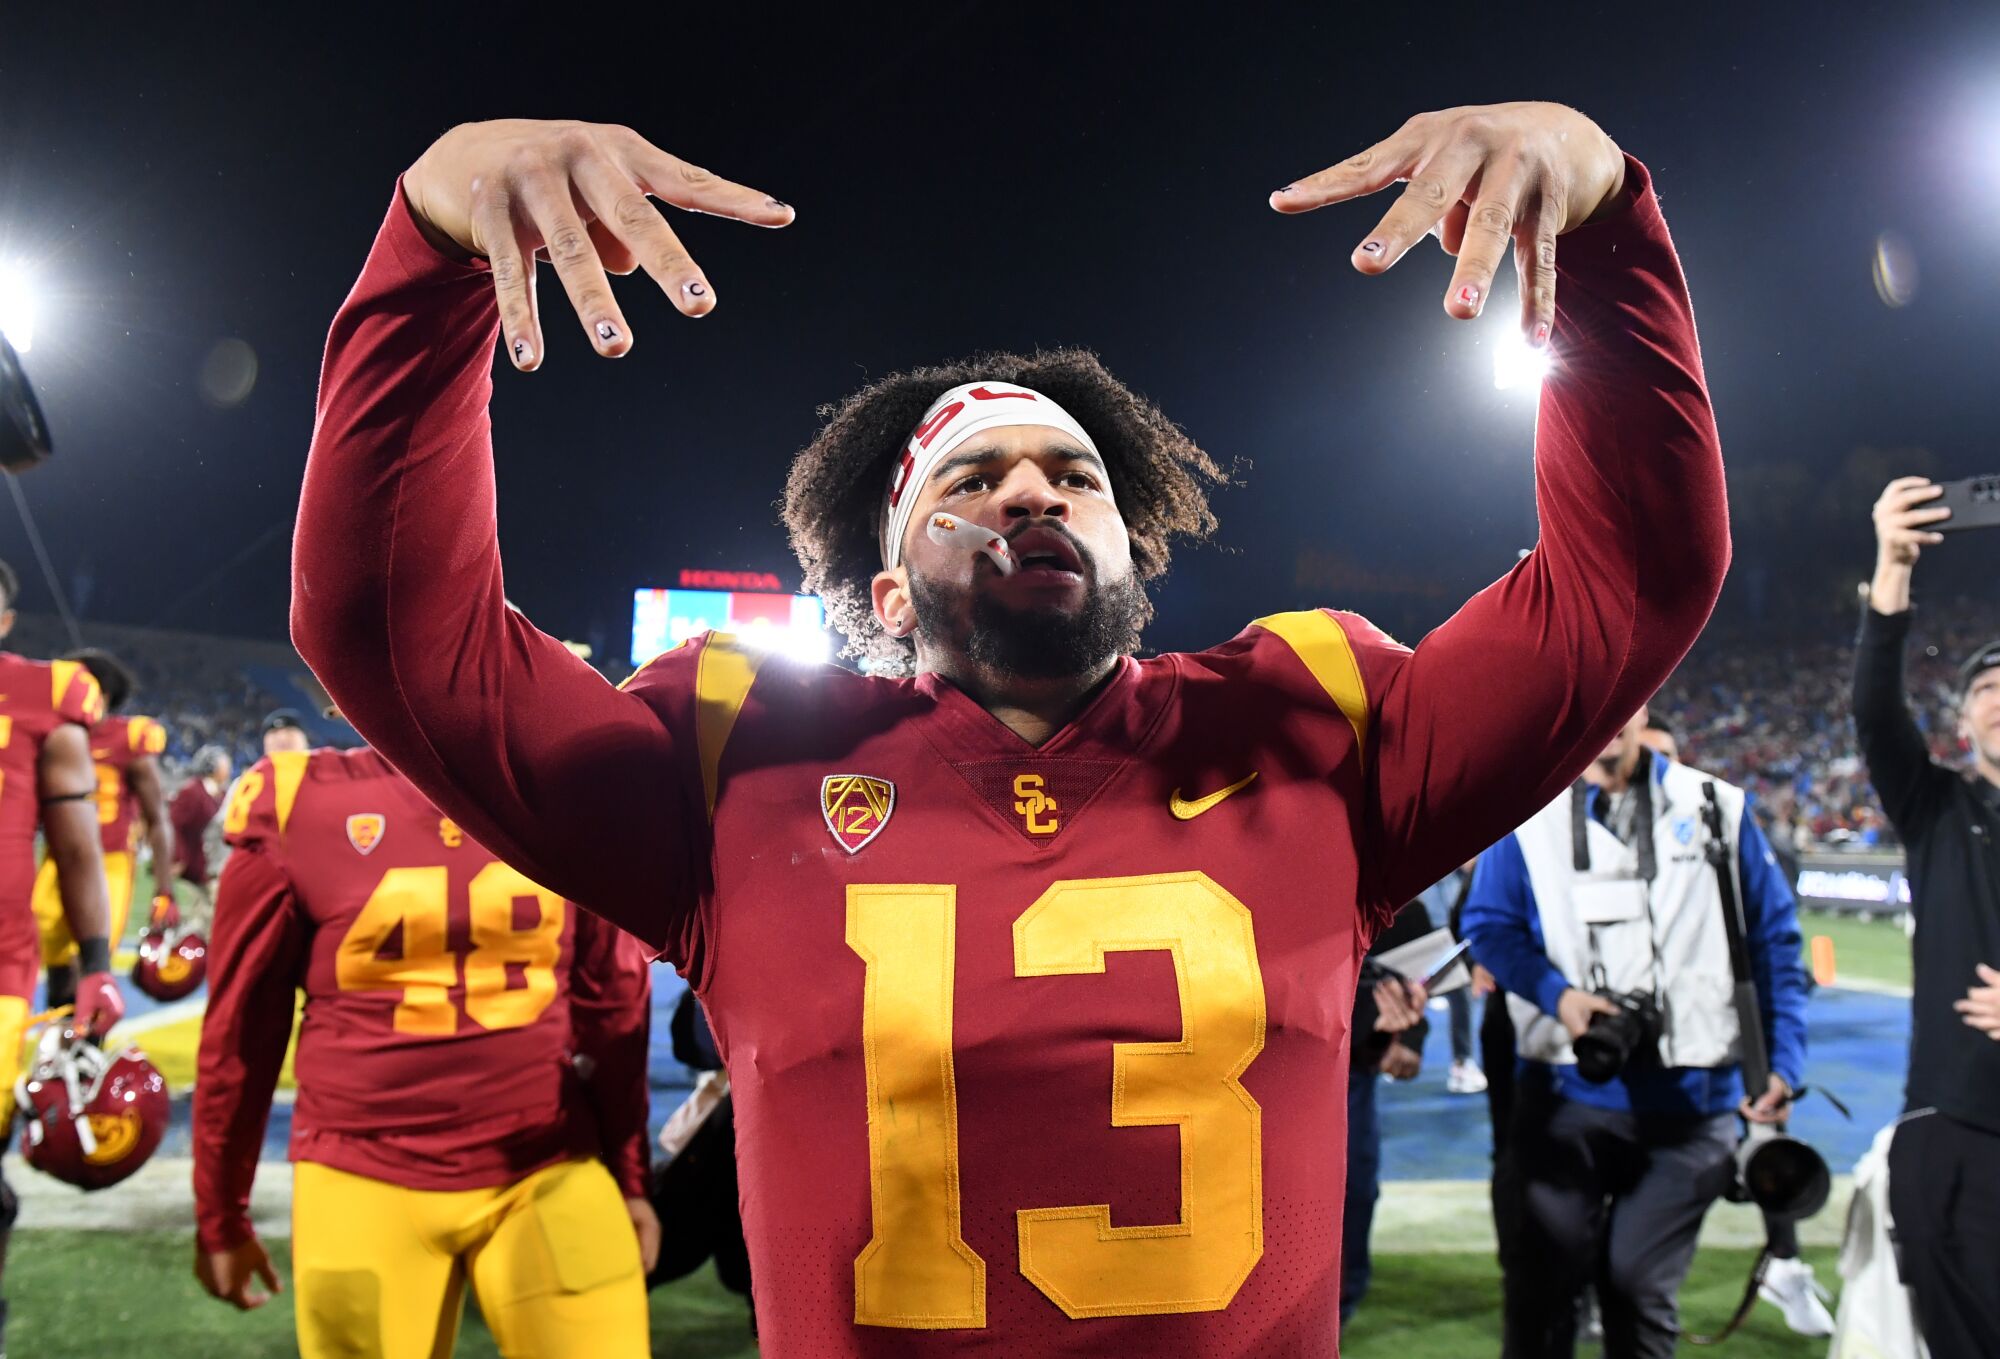 USC quarterback Caleb Williams celebrates after the Trojans' 48-45 victory over UCLA at the Rose Bowl.